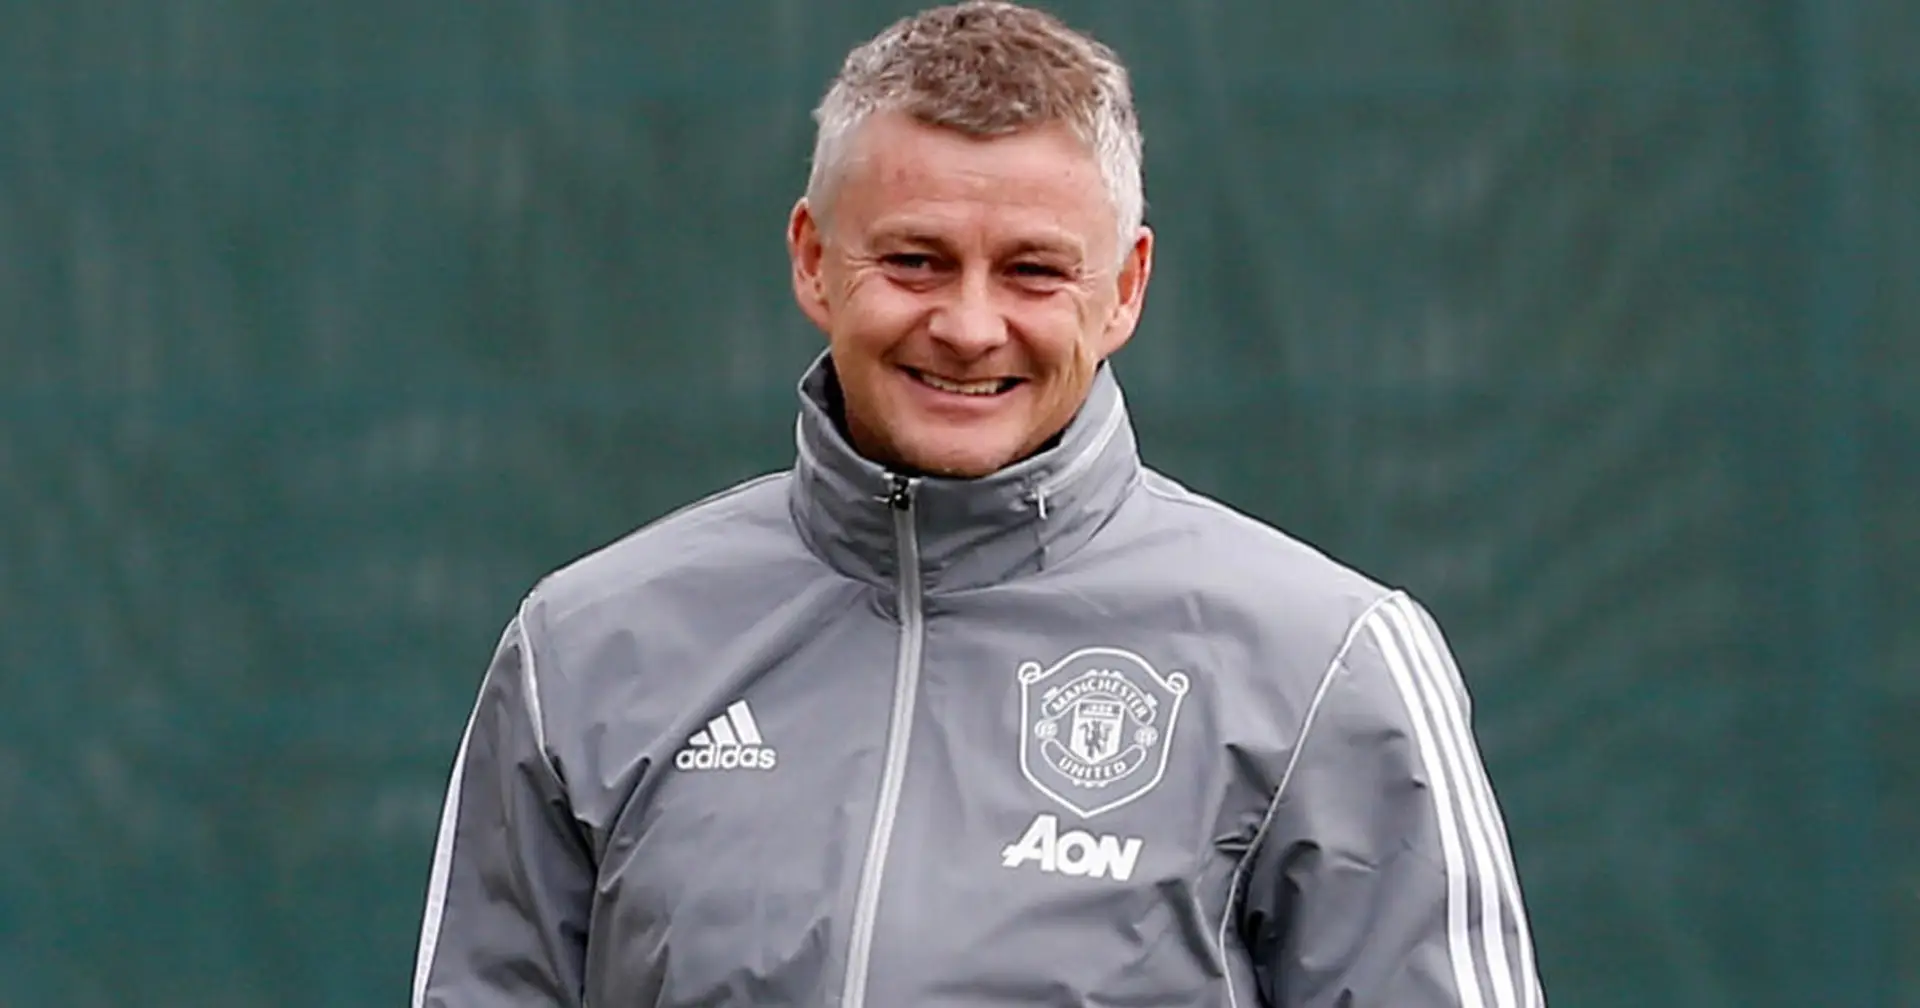 Solskjaer names promising youngster who could soon be part of United’s first-team squad